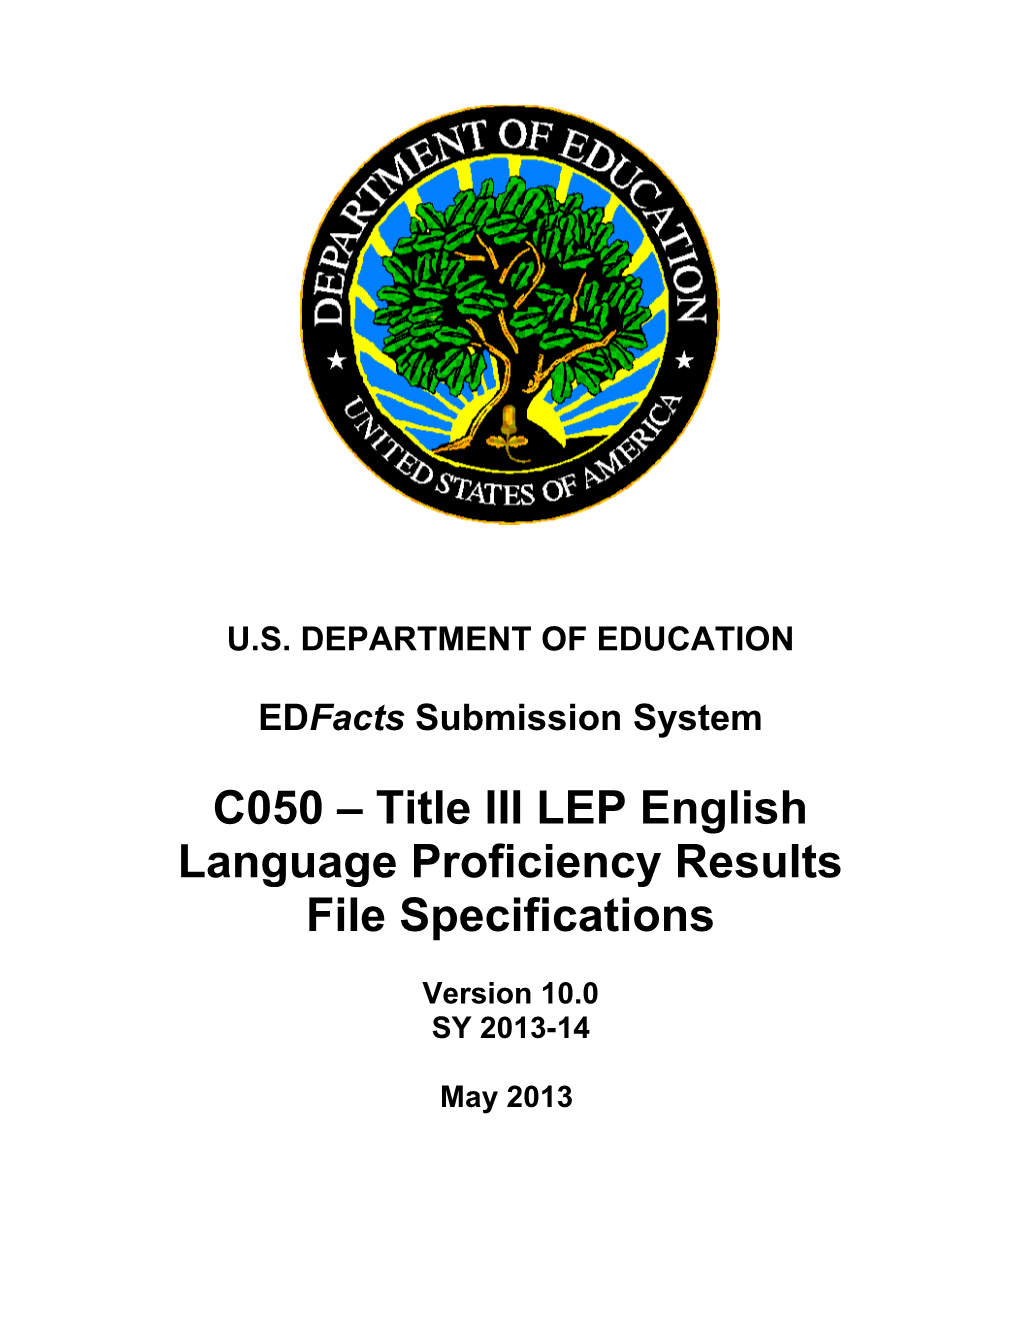 Title III Limited English Proficiency (LEP) English Language Proficiency Results File